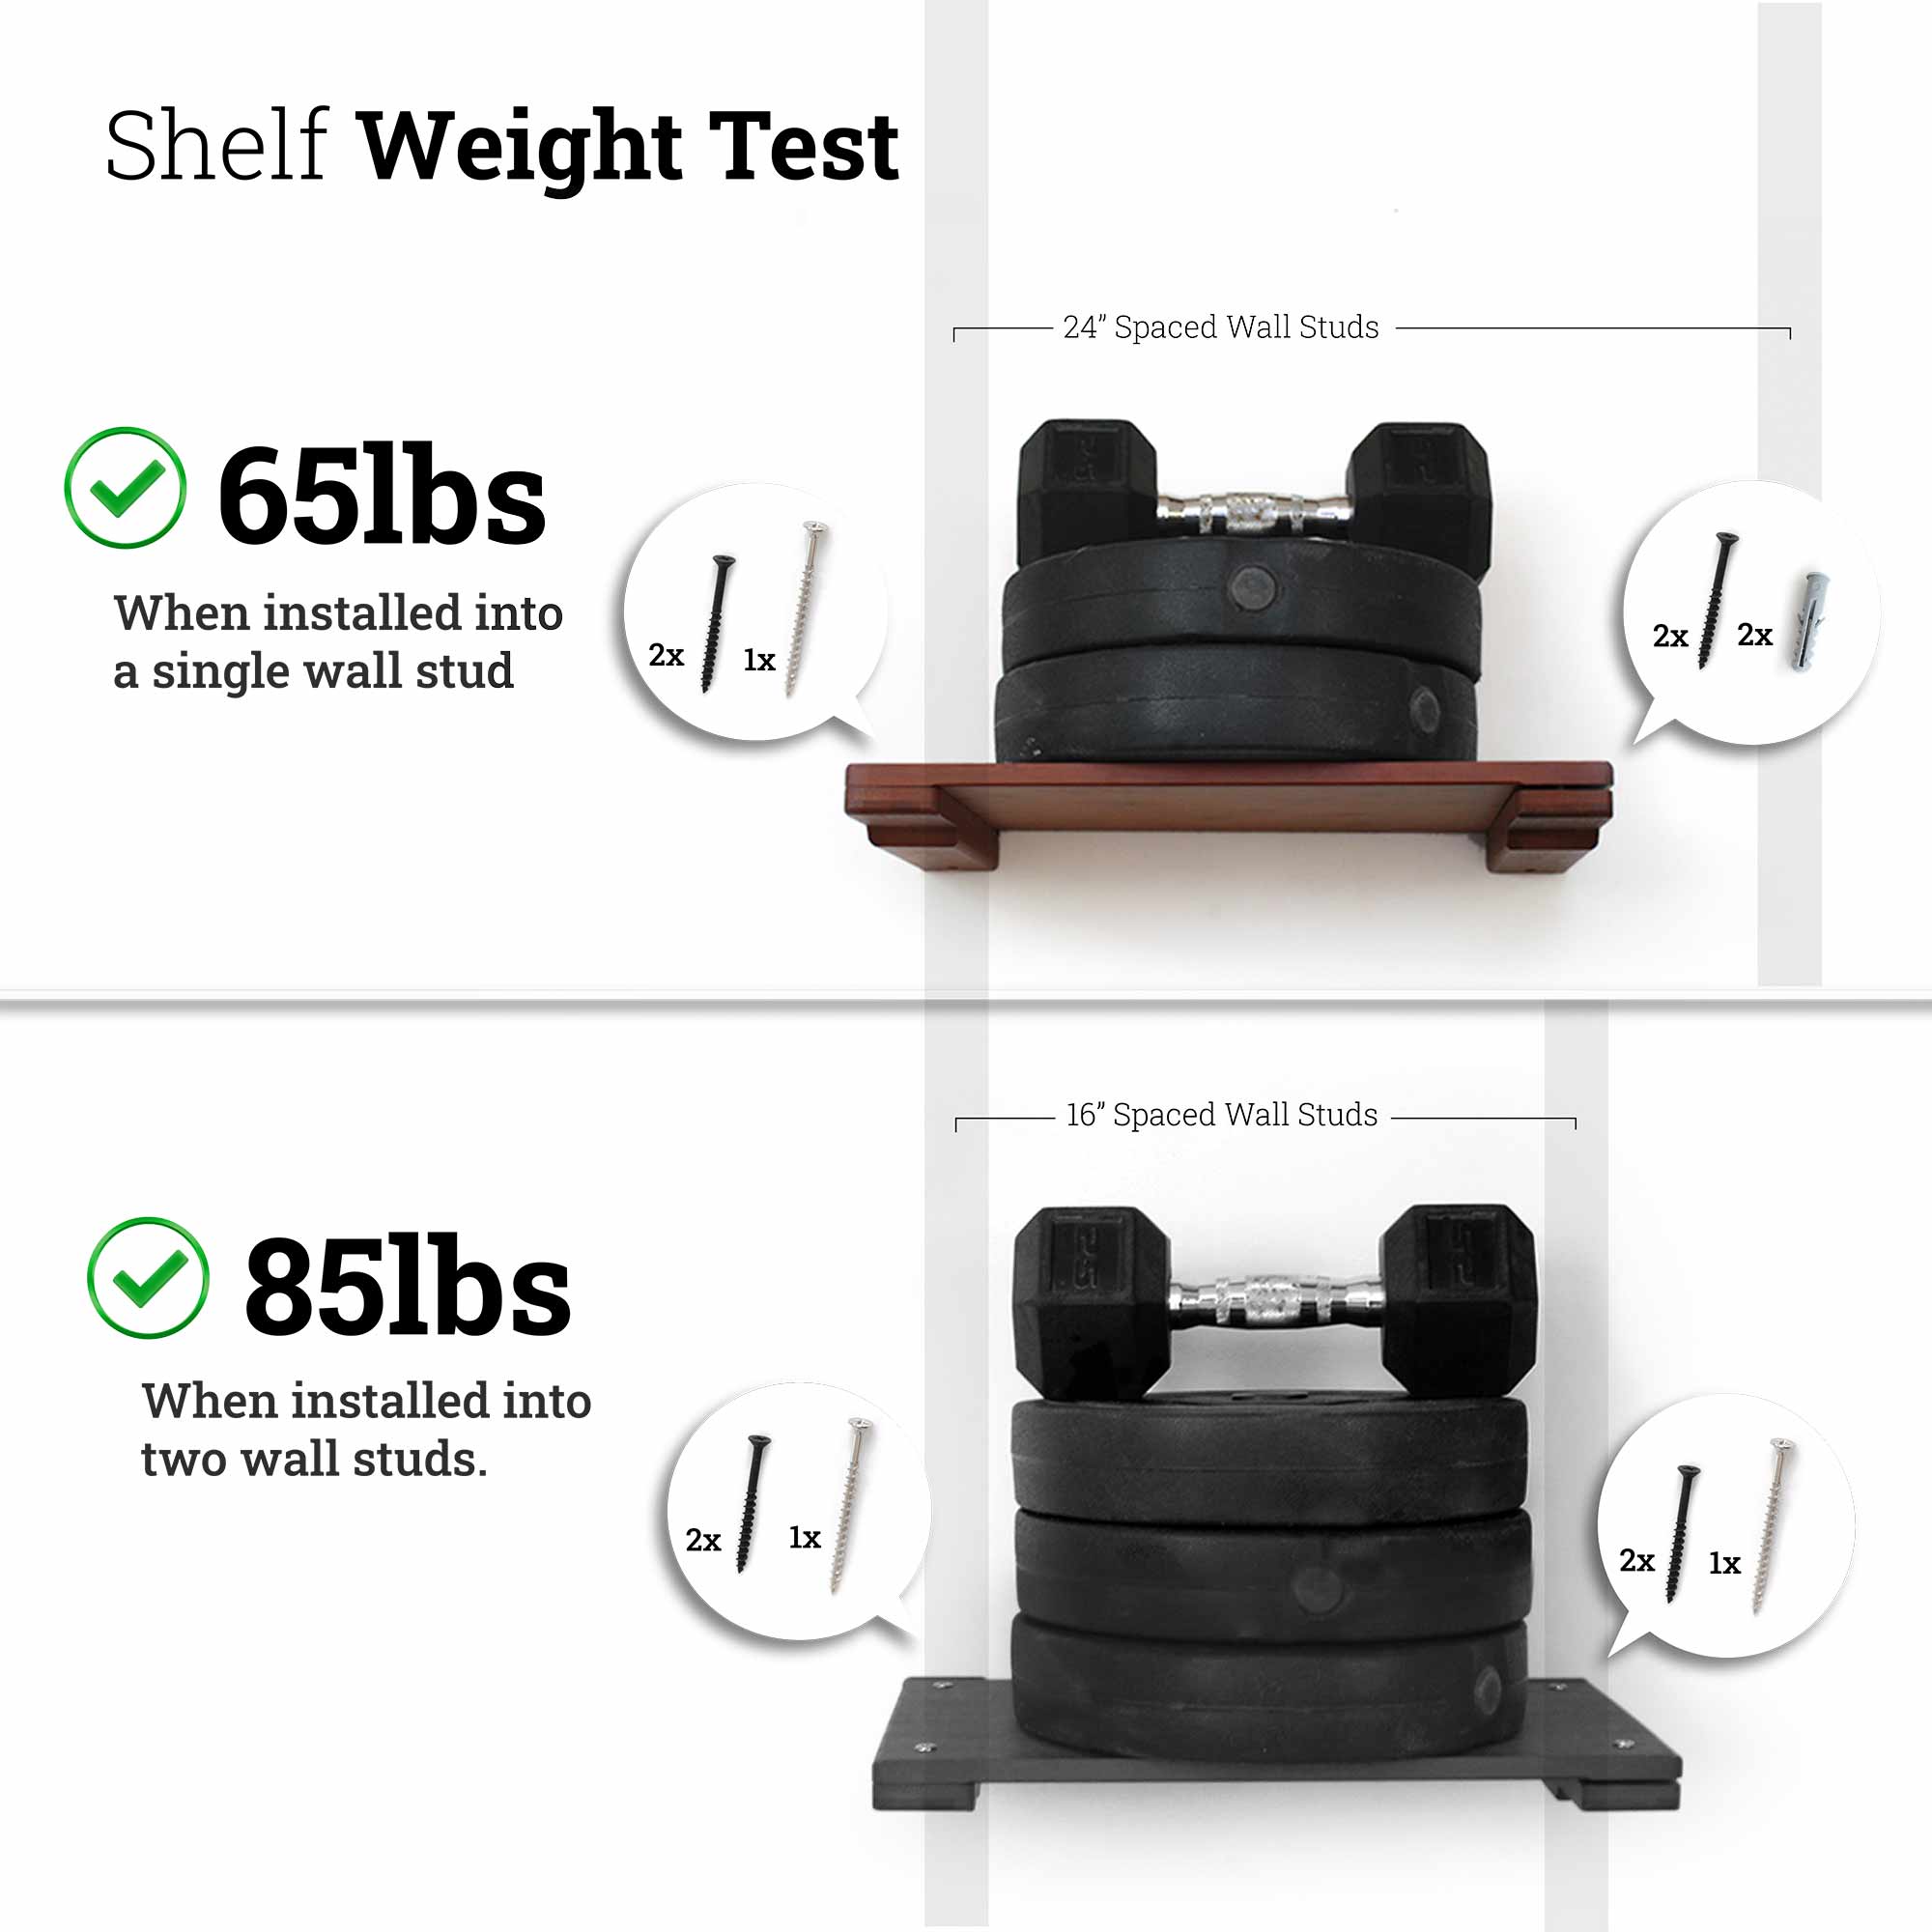 Photo showcases the weight testing of a shelf mounted into studs or one stud and drywall